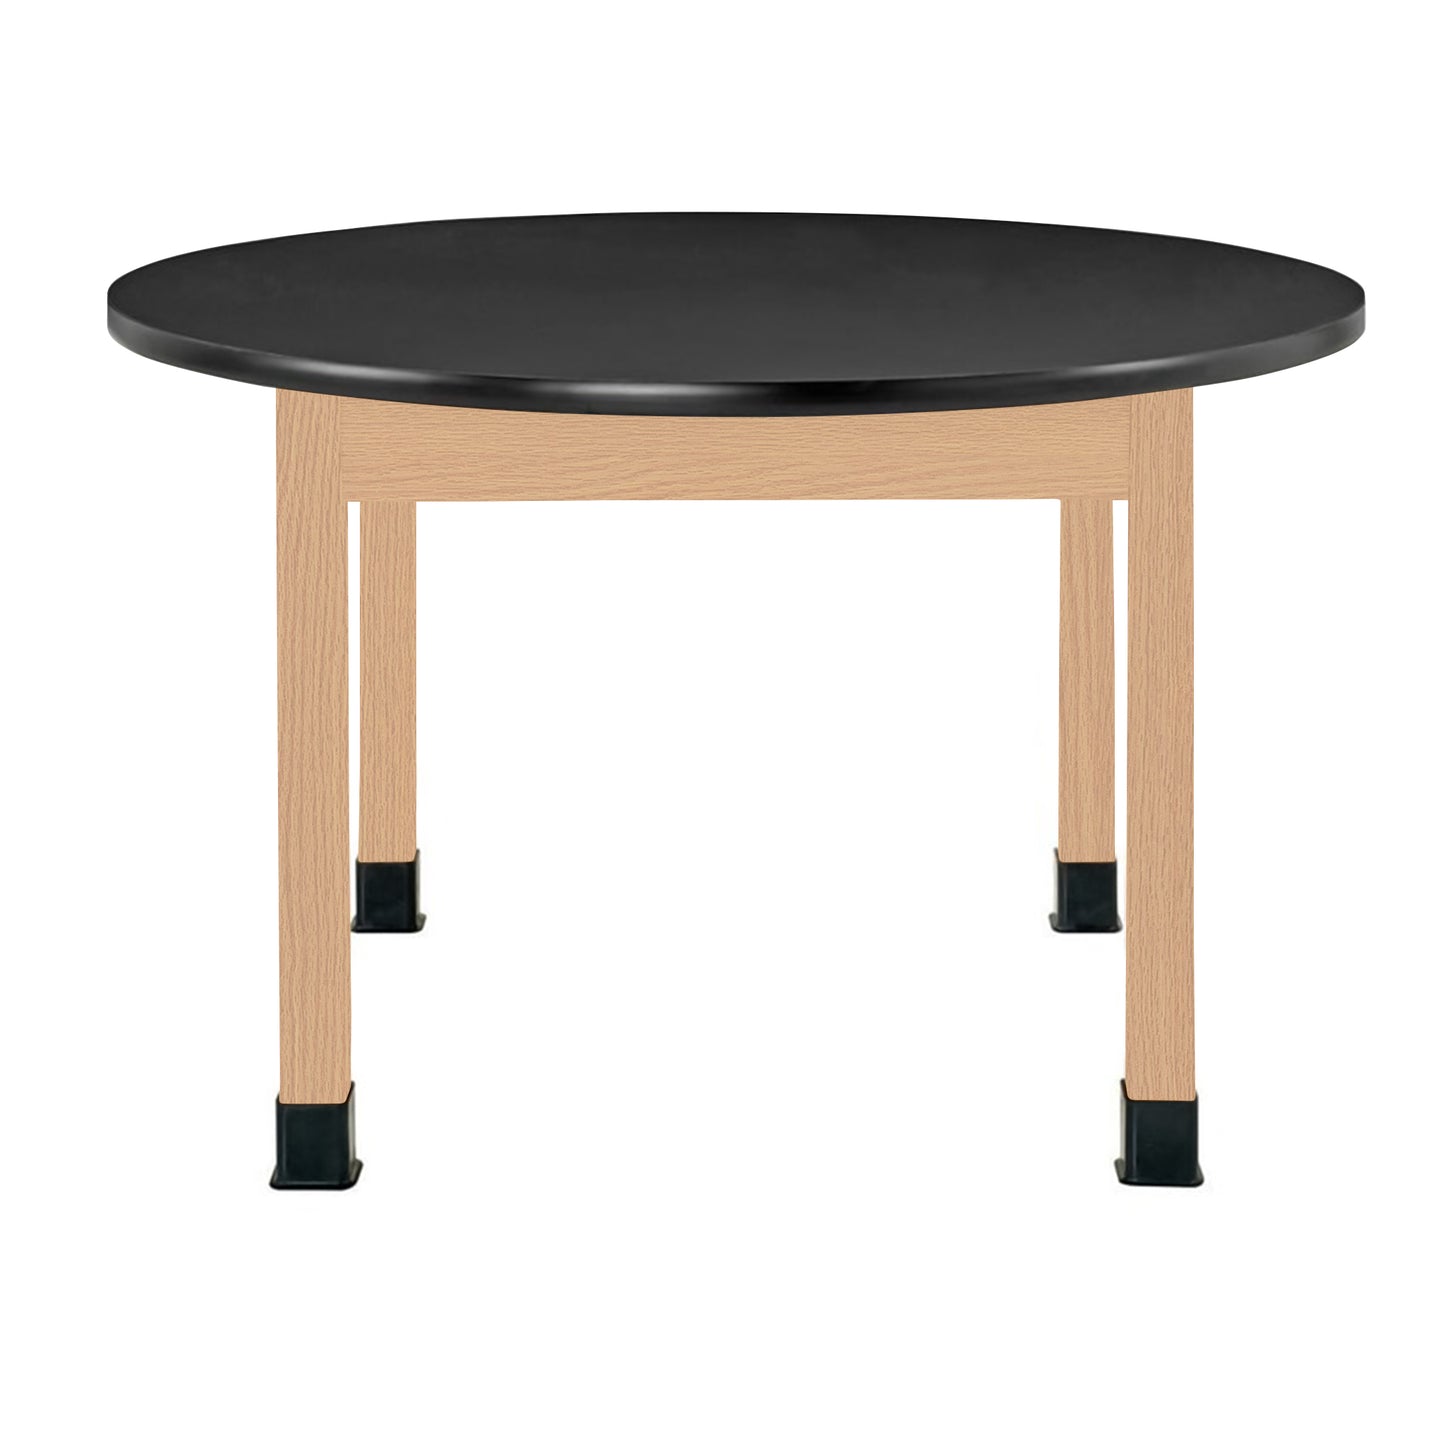 Diversified Woodcrafts Science Table - Plain Apron - Round 48" Diameter - Solid Wood Frame and Adjustable Glides